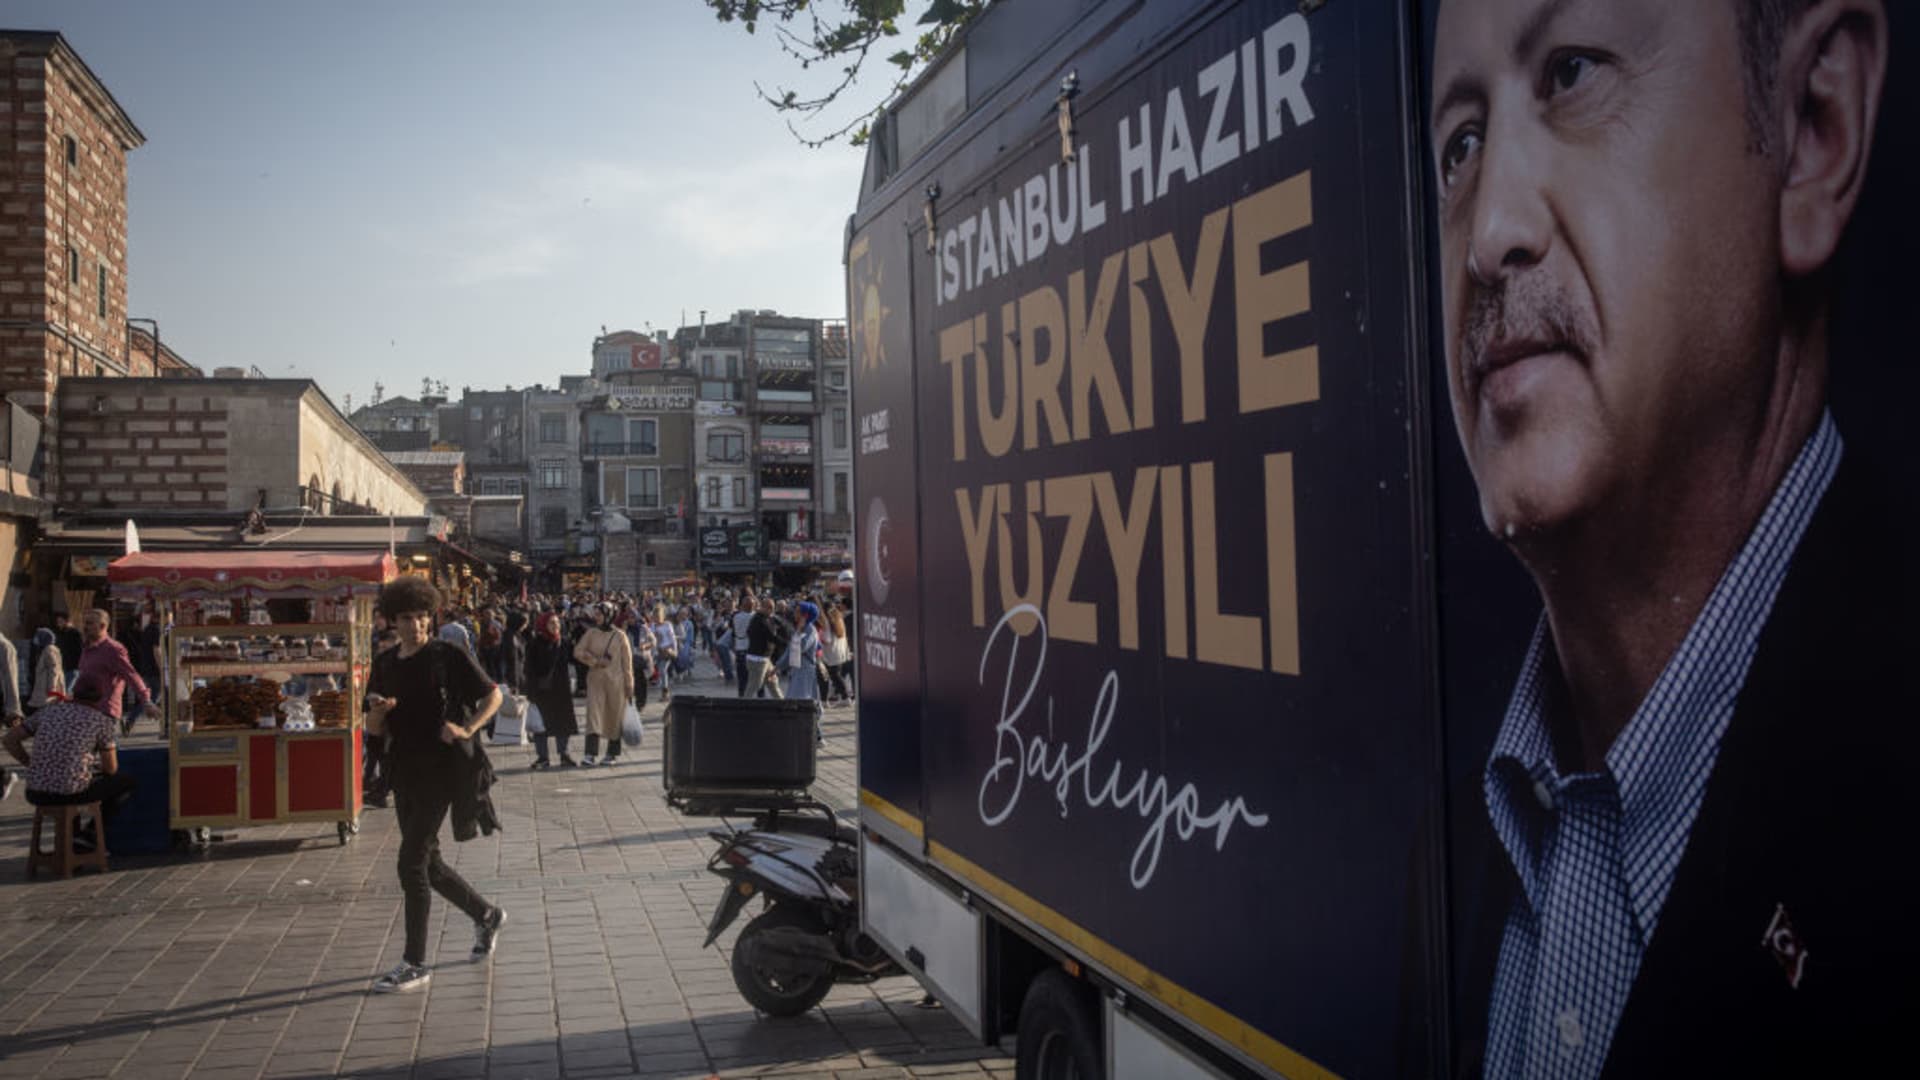 Turkey votes in runoff election after candidates double down on nationalism and fear